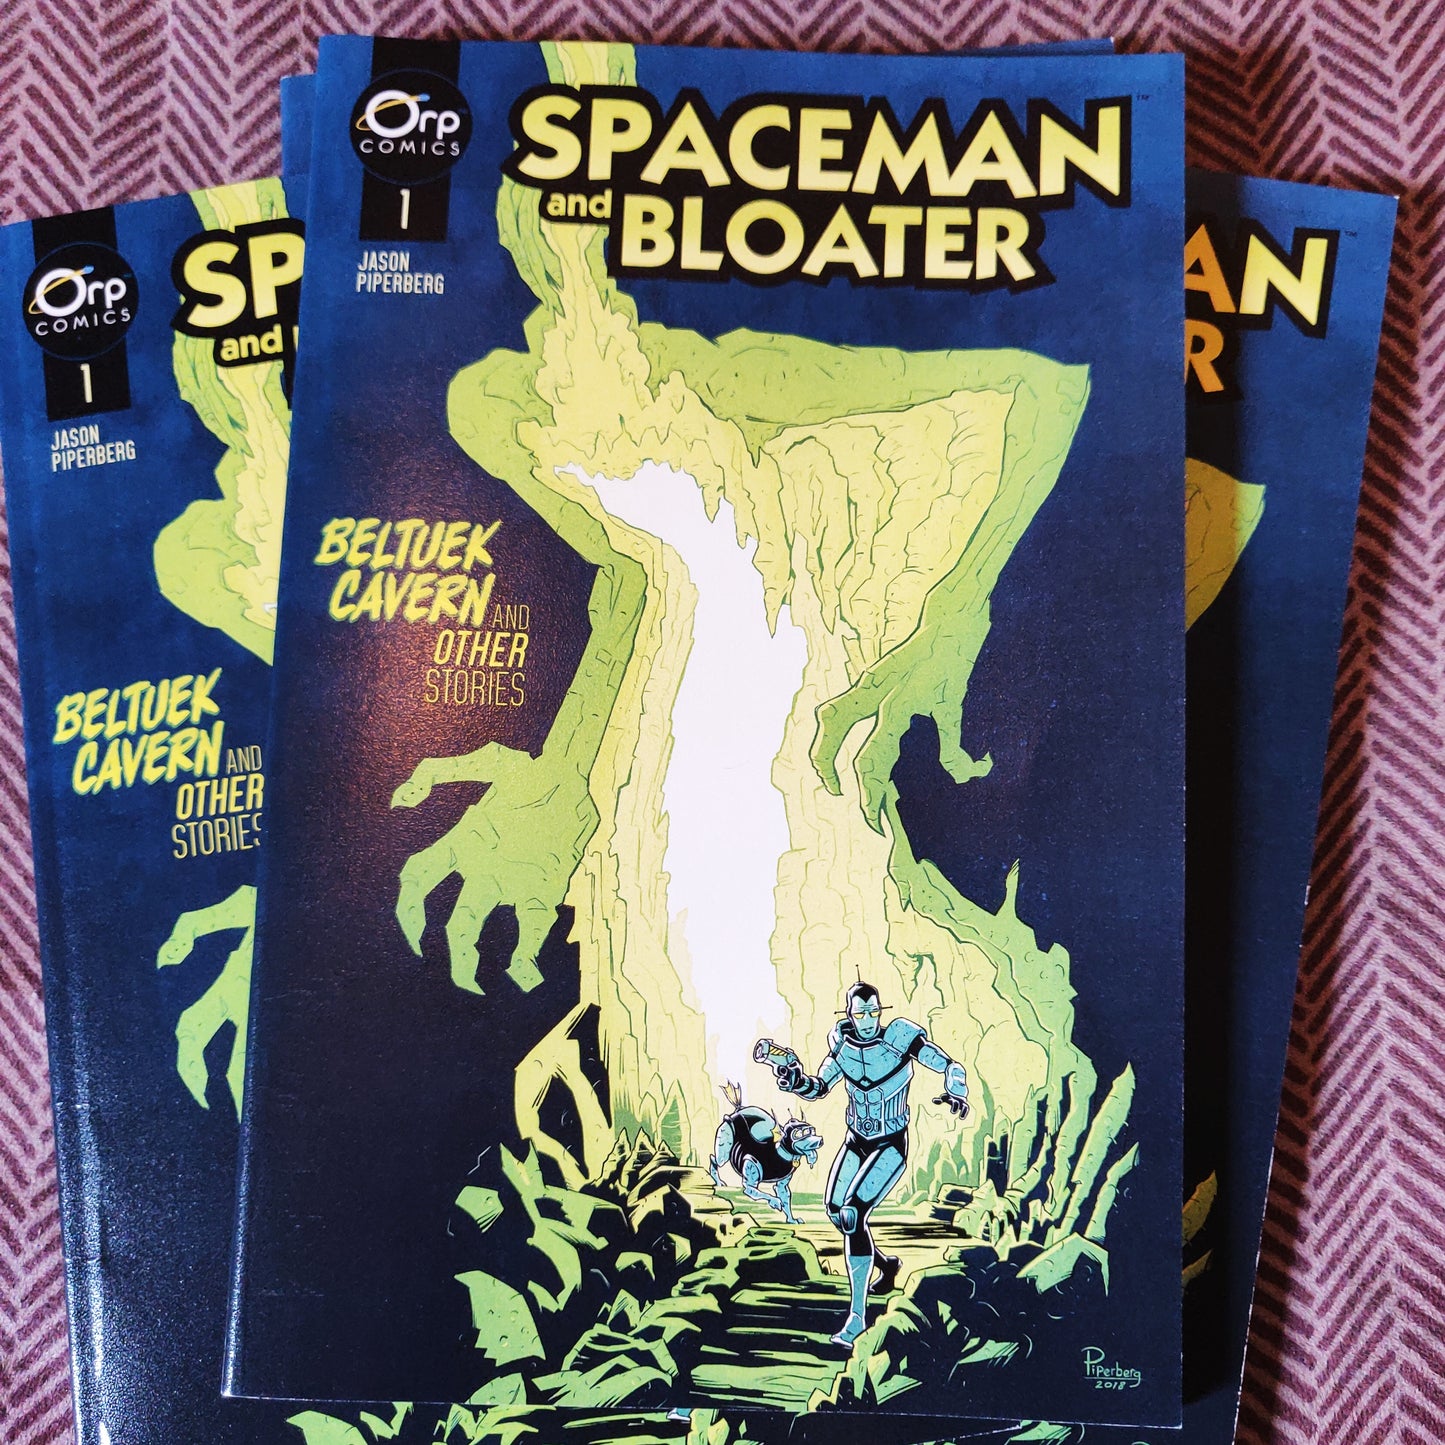 Spaceman and Bloater full color COMIC